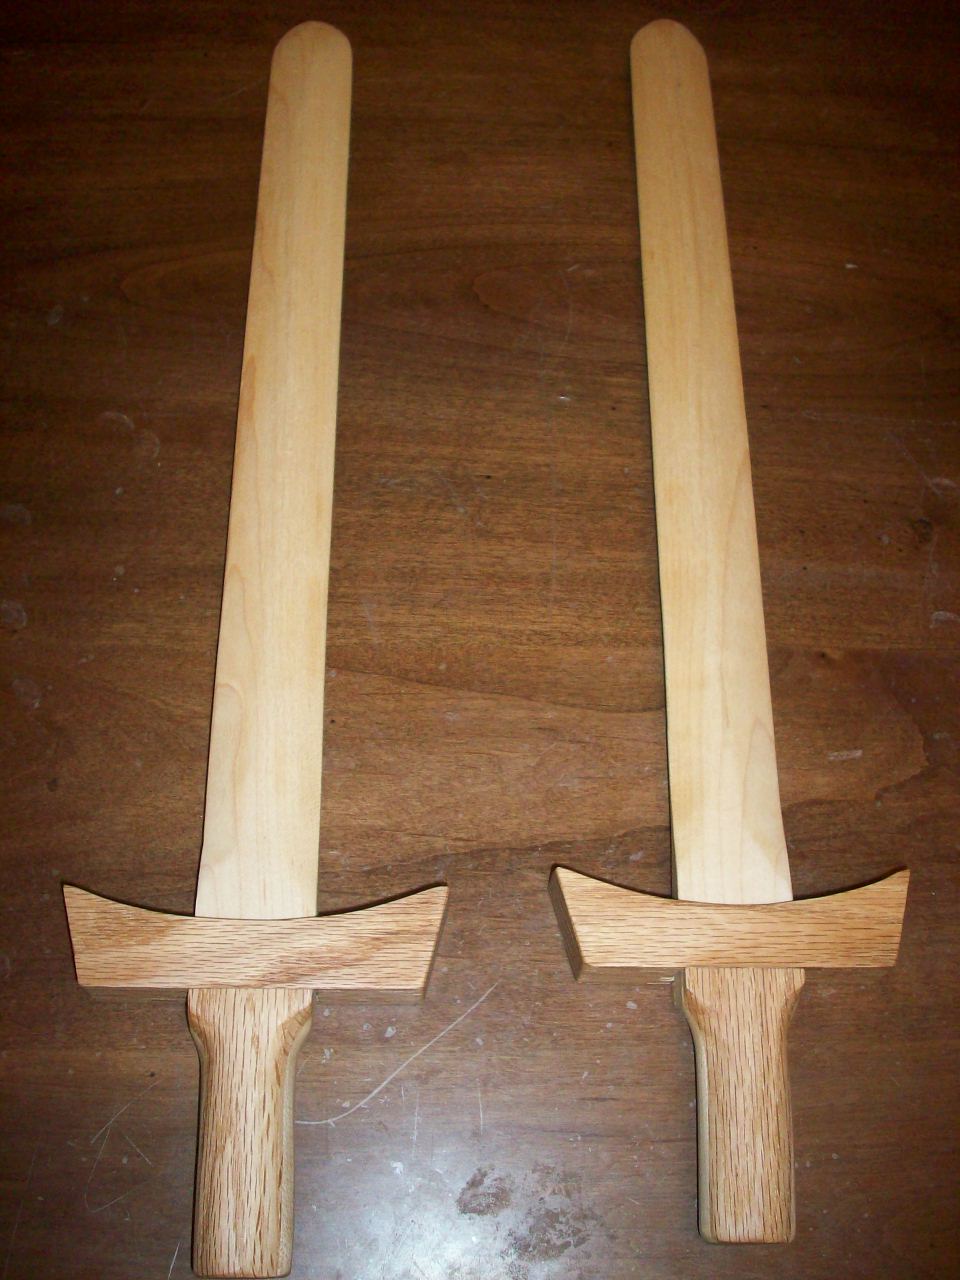 How to Make Wooden Swords